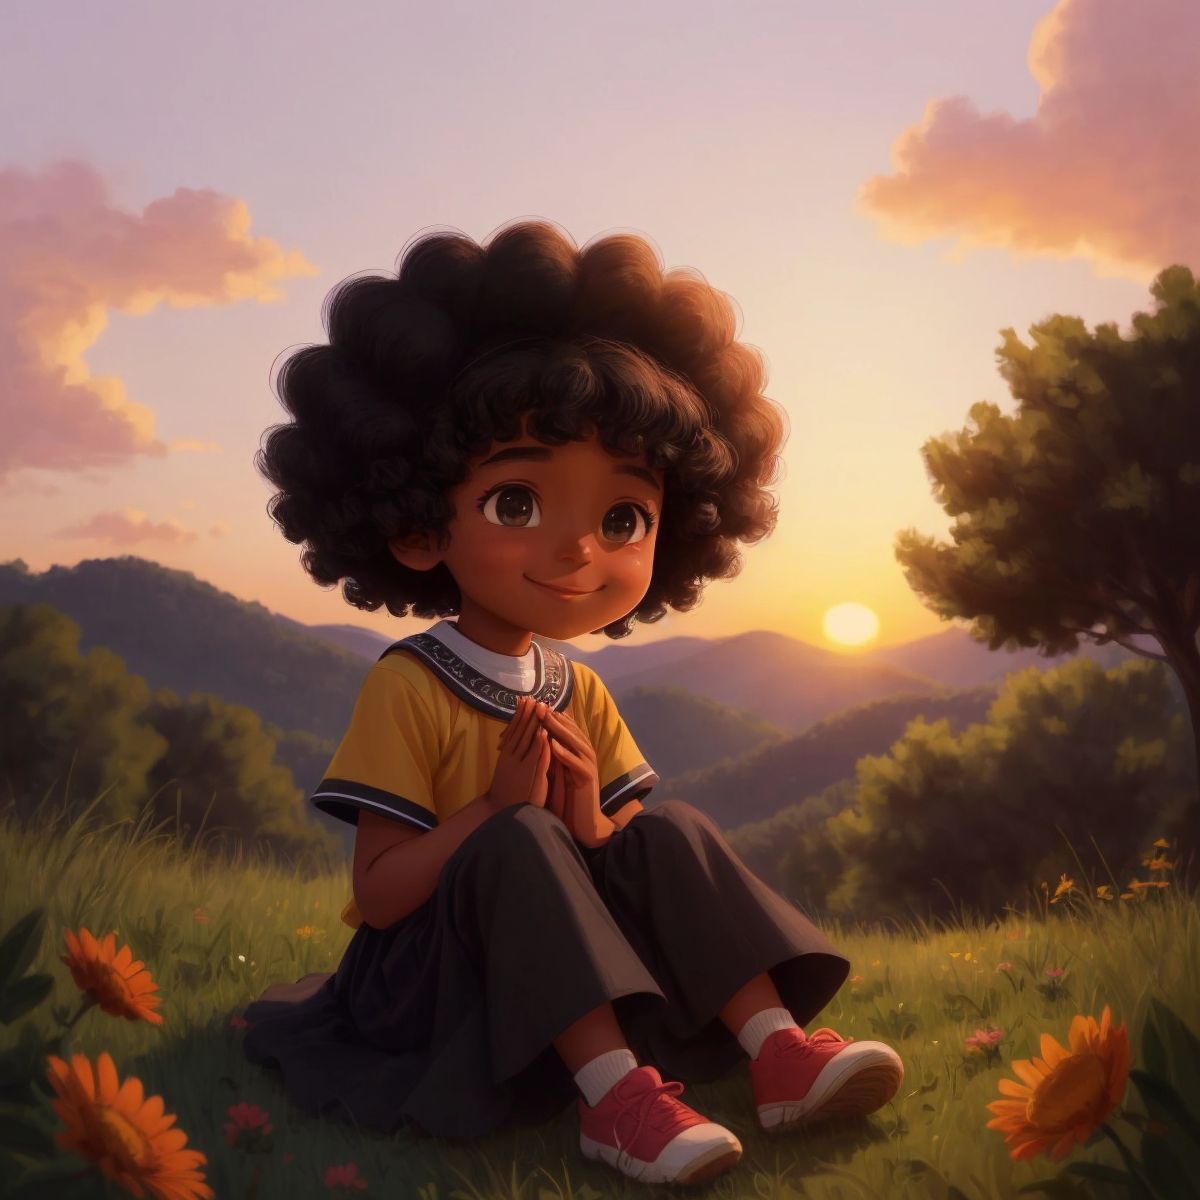 Zariah sitting on a hill during sunset, surrounded by nature, with a warm, grateful smile as she prays.